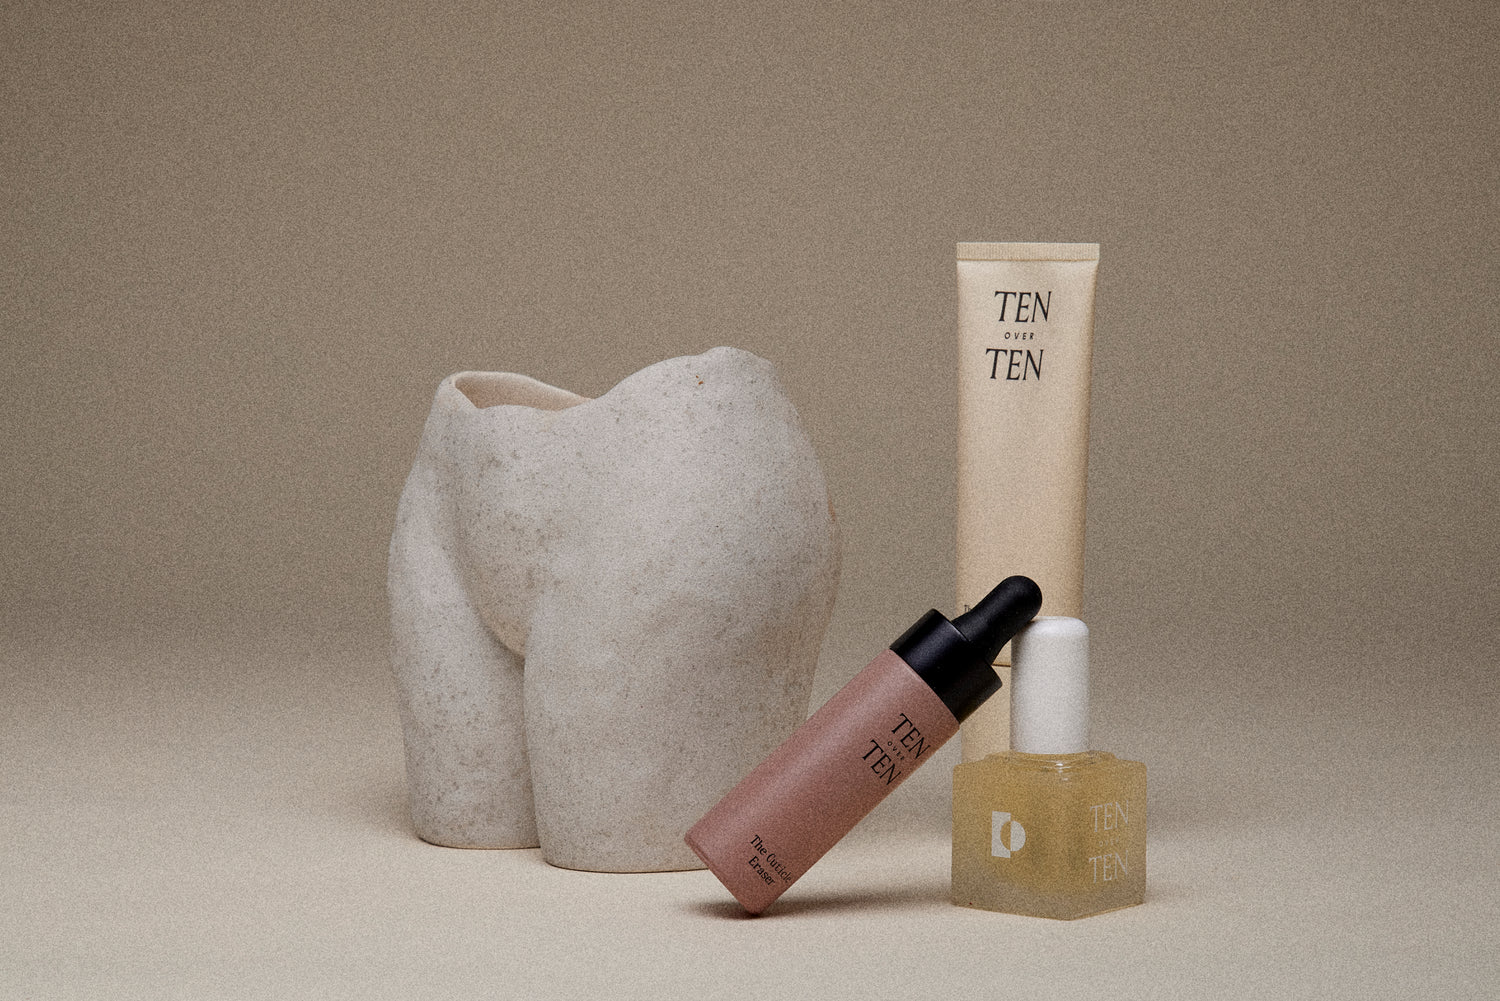 Three products from Ten Over Ten in front of a sculpture of a woman's torso